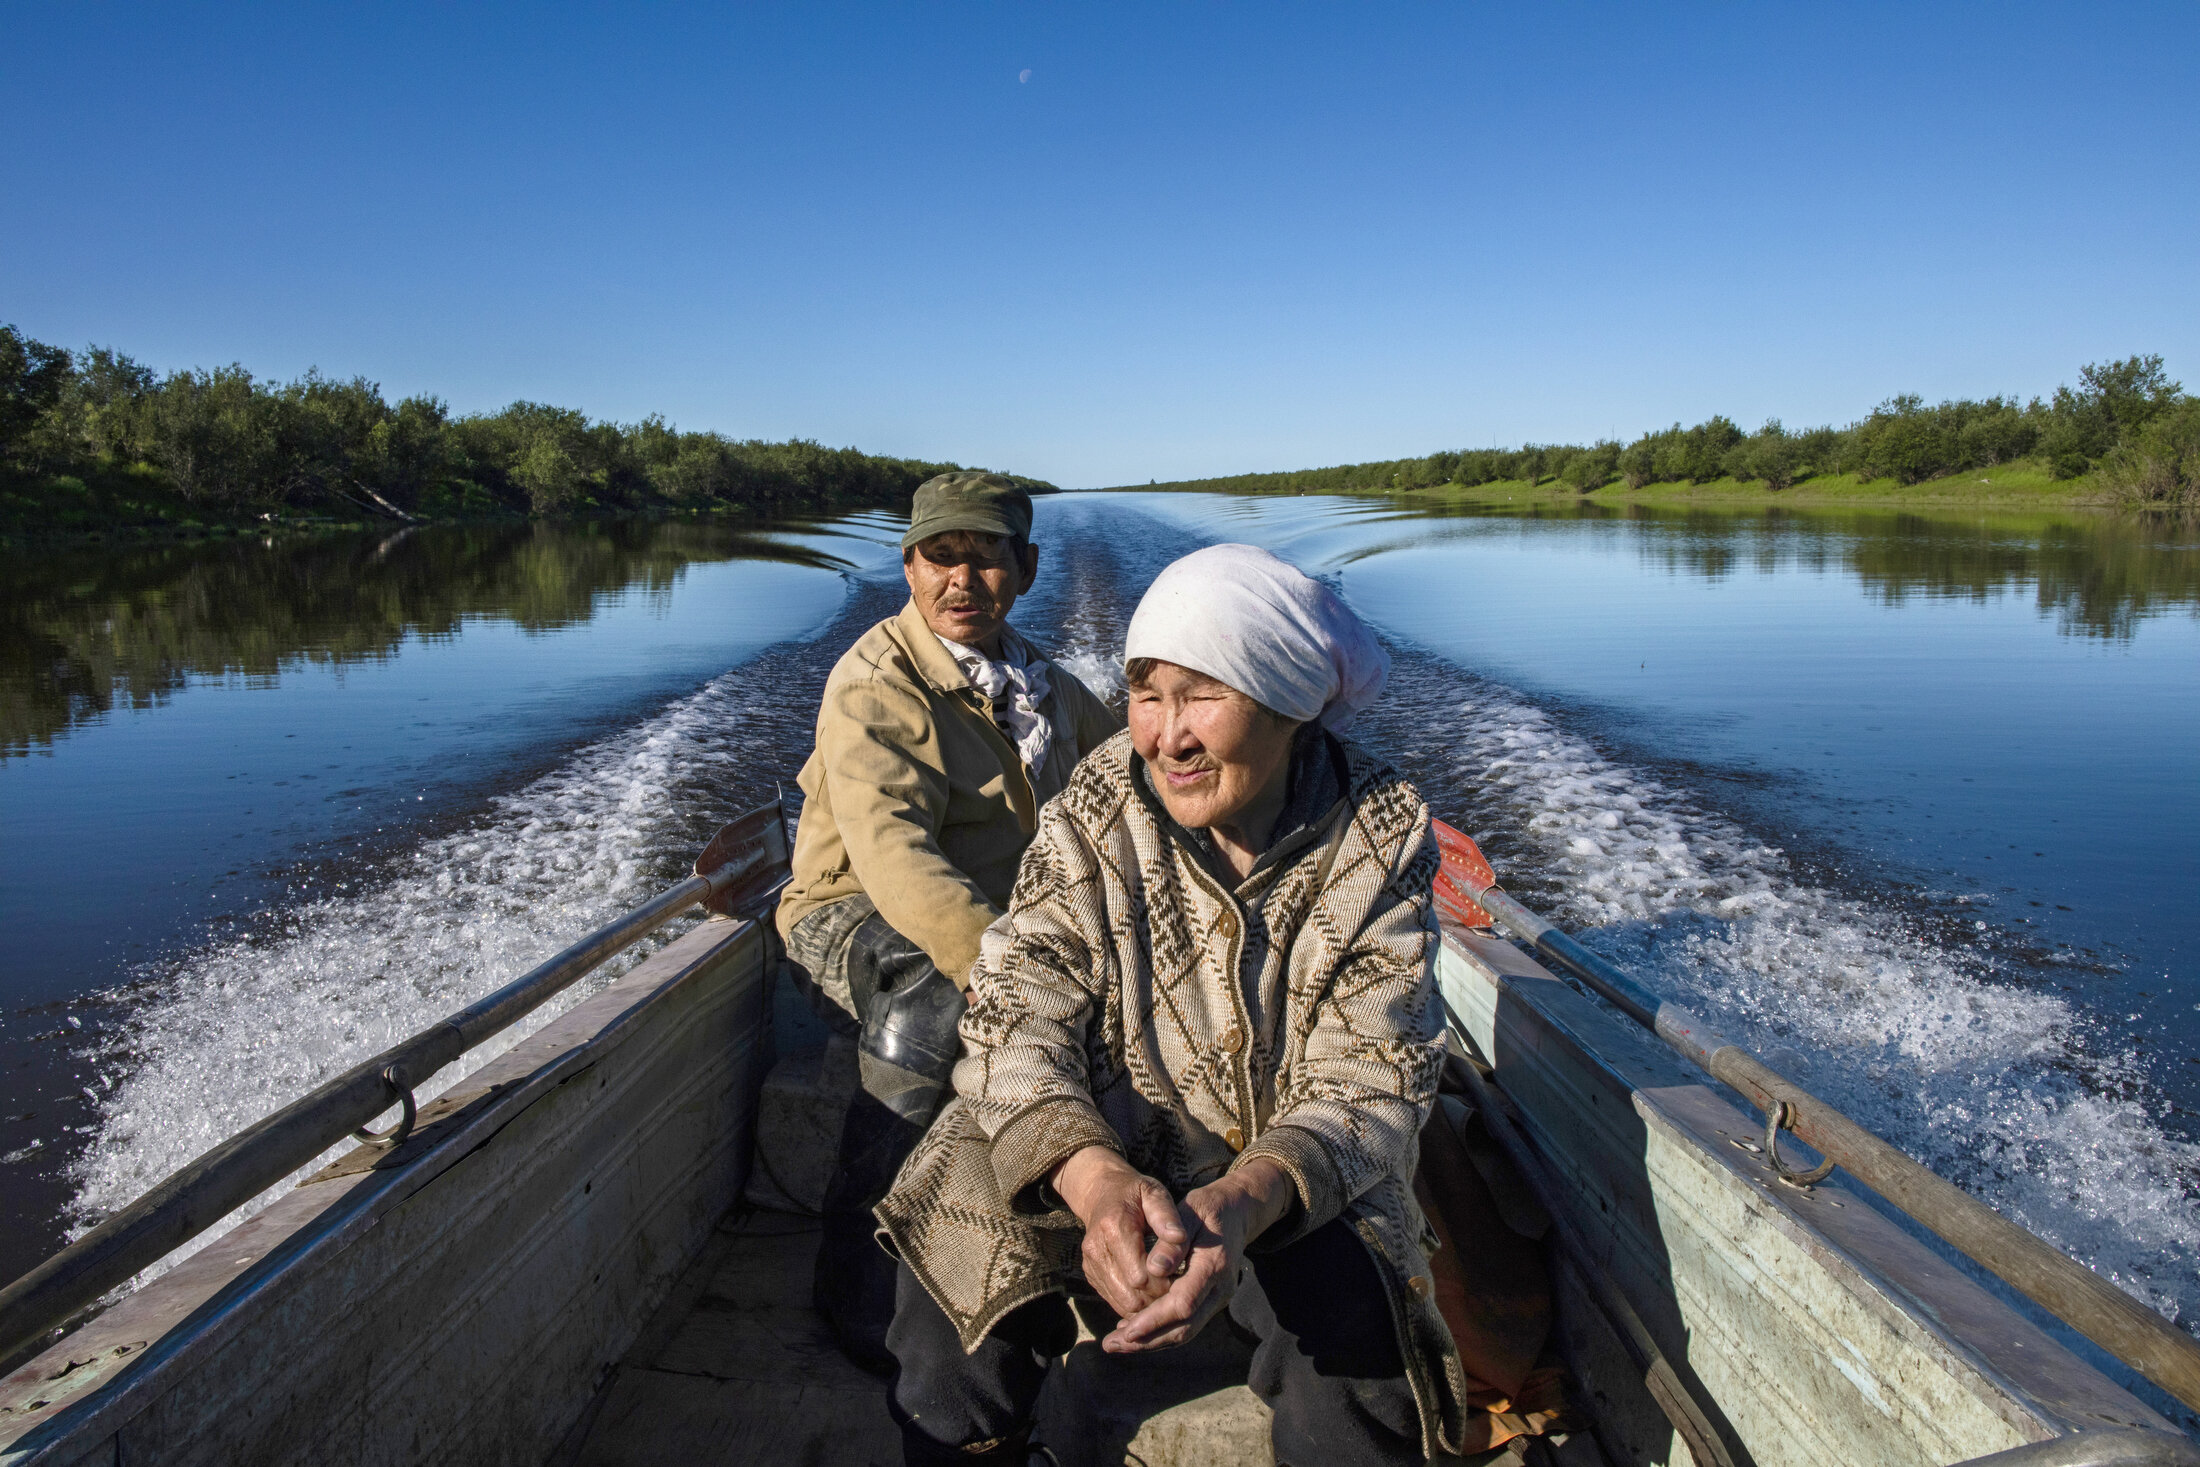  Nikolai and Ivana check their fish line near their home outside of Chersky, Siberia. Families in this region depend on fishing and hunting as dietary staples, and struggle to keep their fish and meat fresh with their ice cellars, or freezers, that a